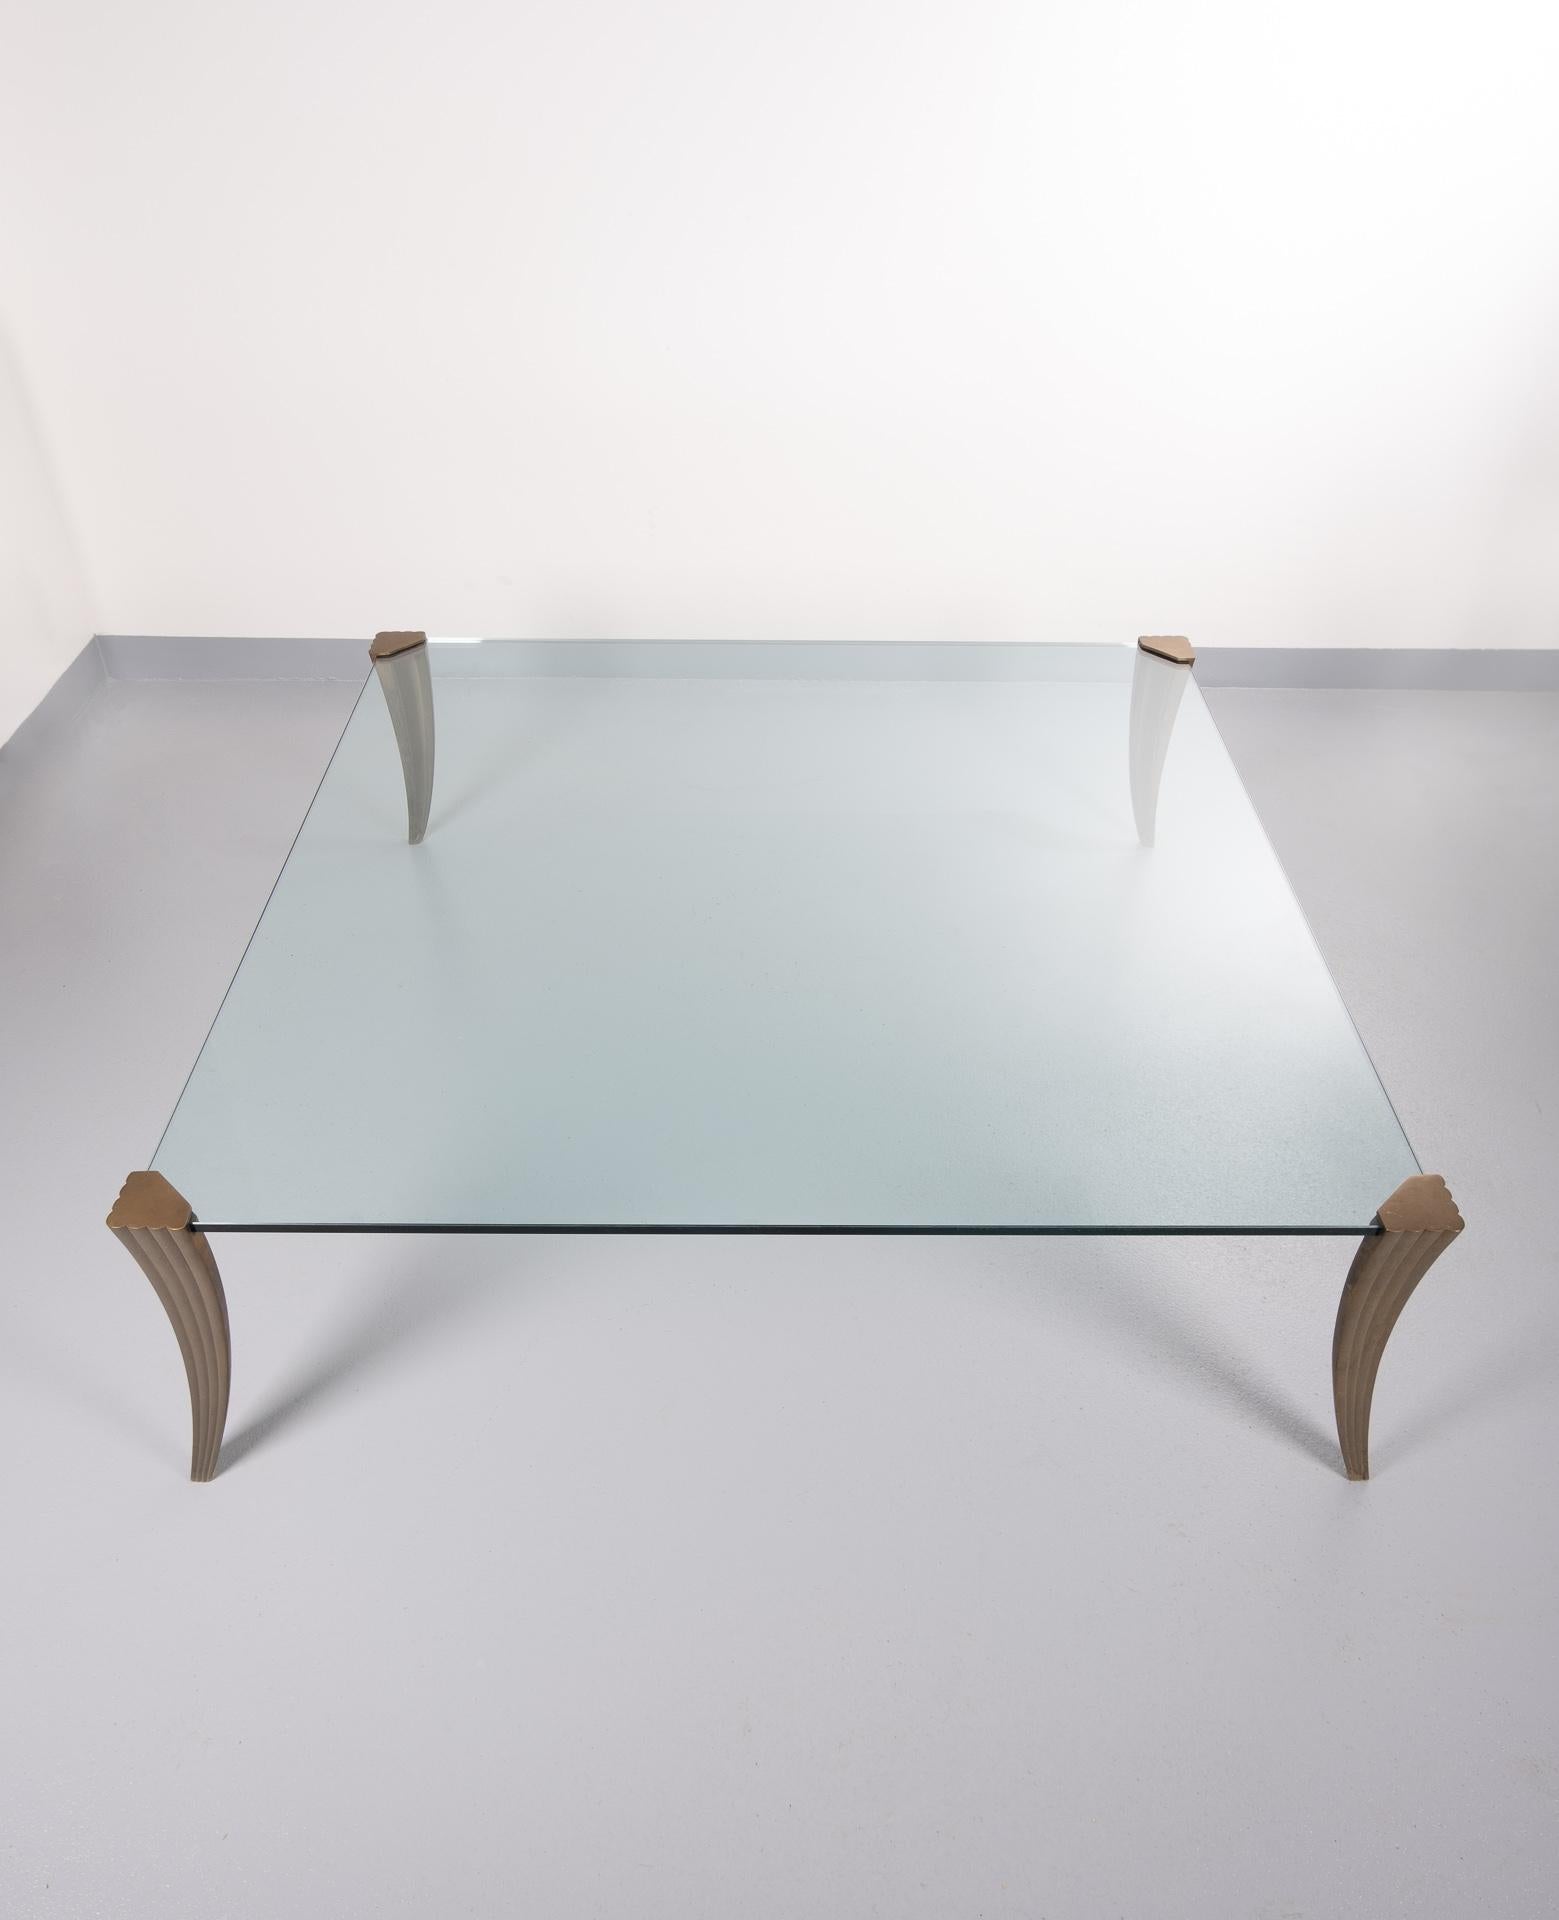 Superb large coffee table by Peter Ghyczy, thick cut glass top on cast bronze legs.
Very rare model. Pioneer series looks like the glass top is floating. Very good condition.